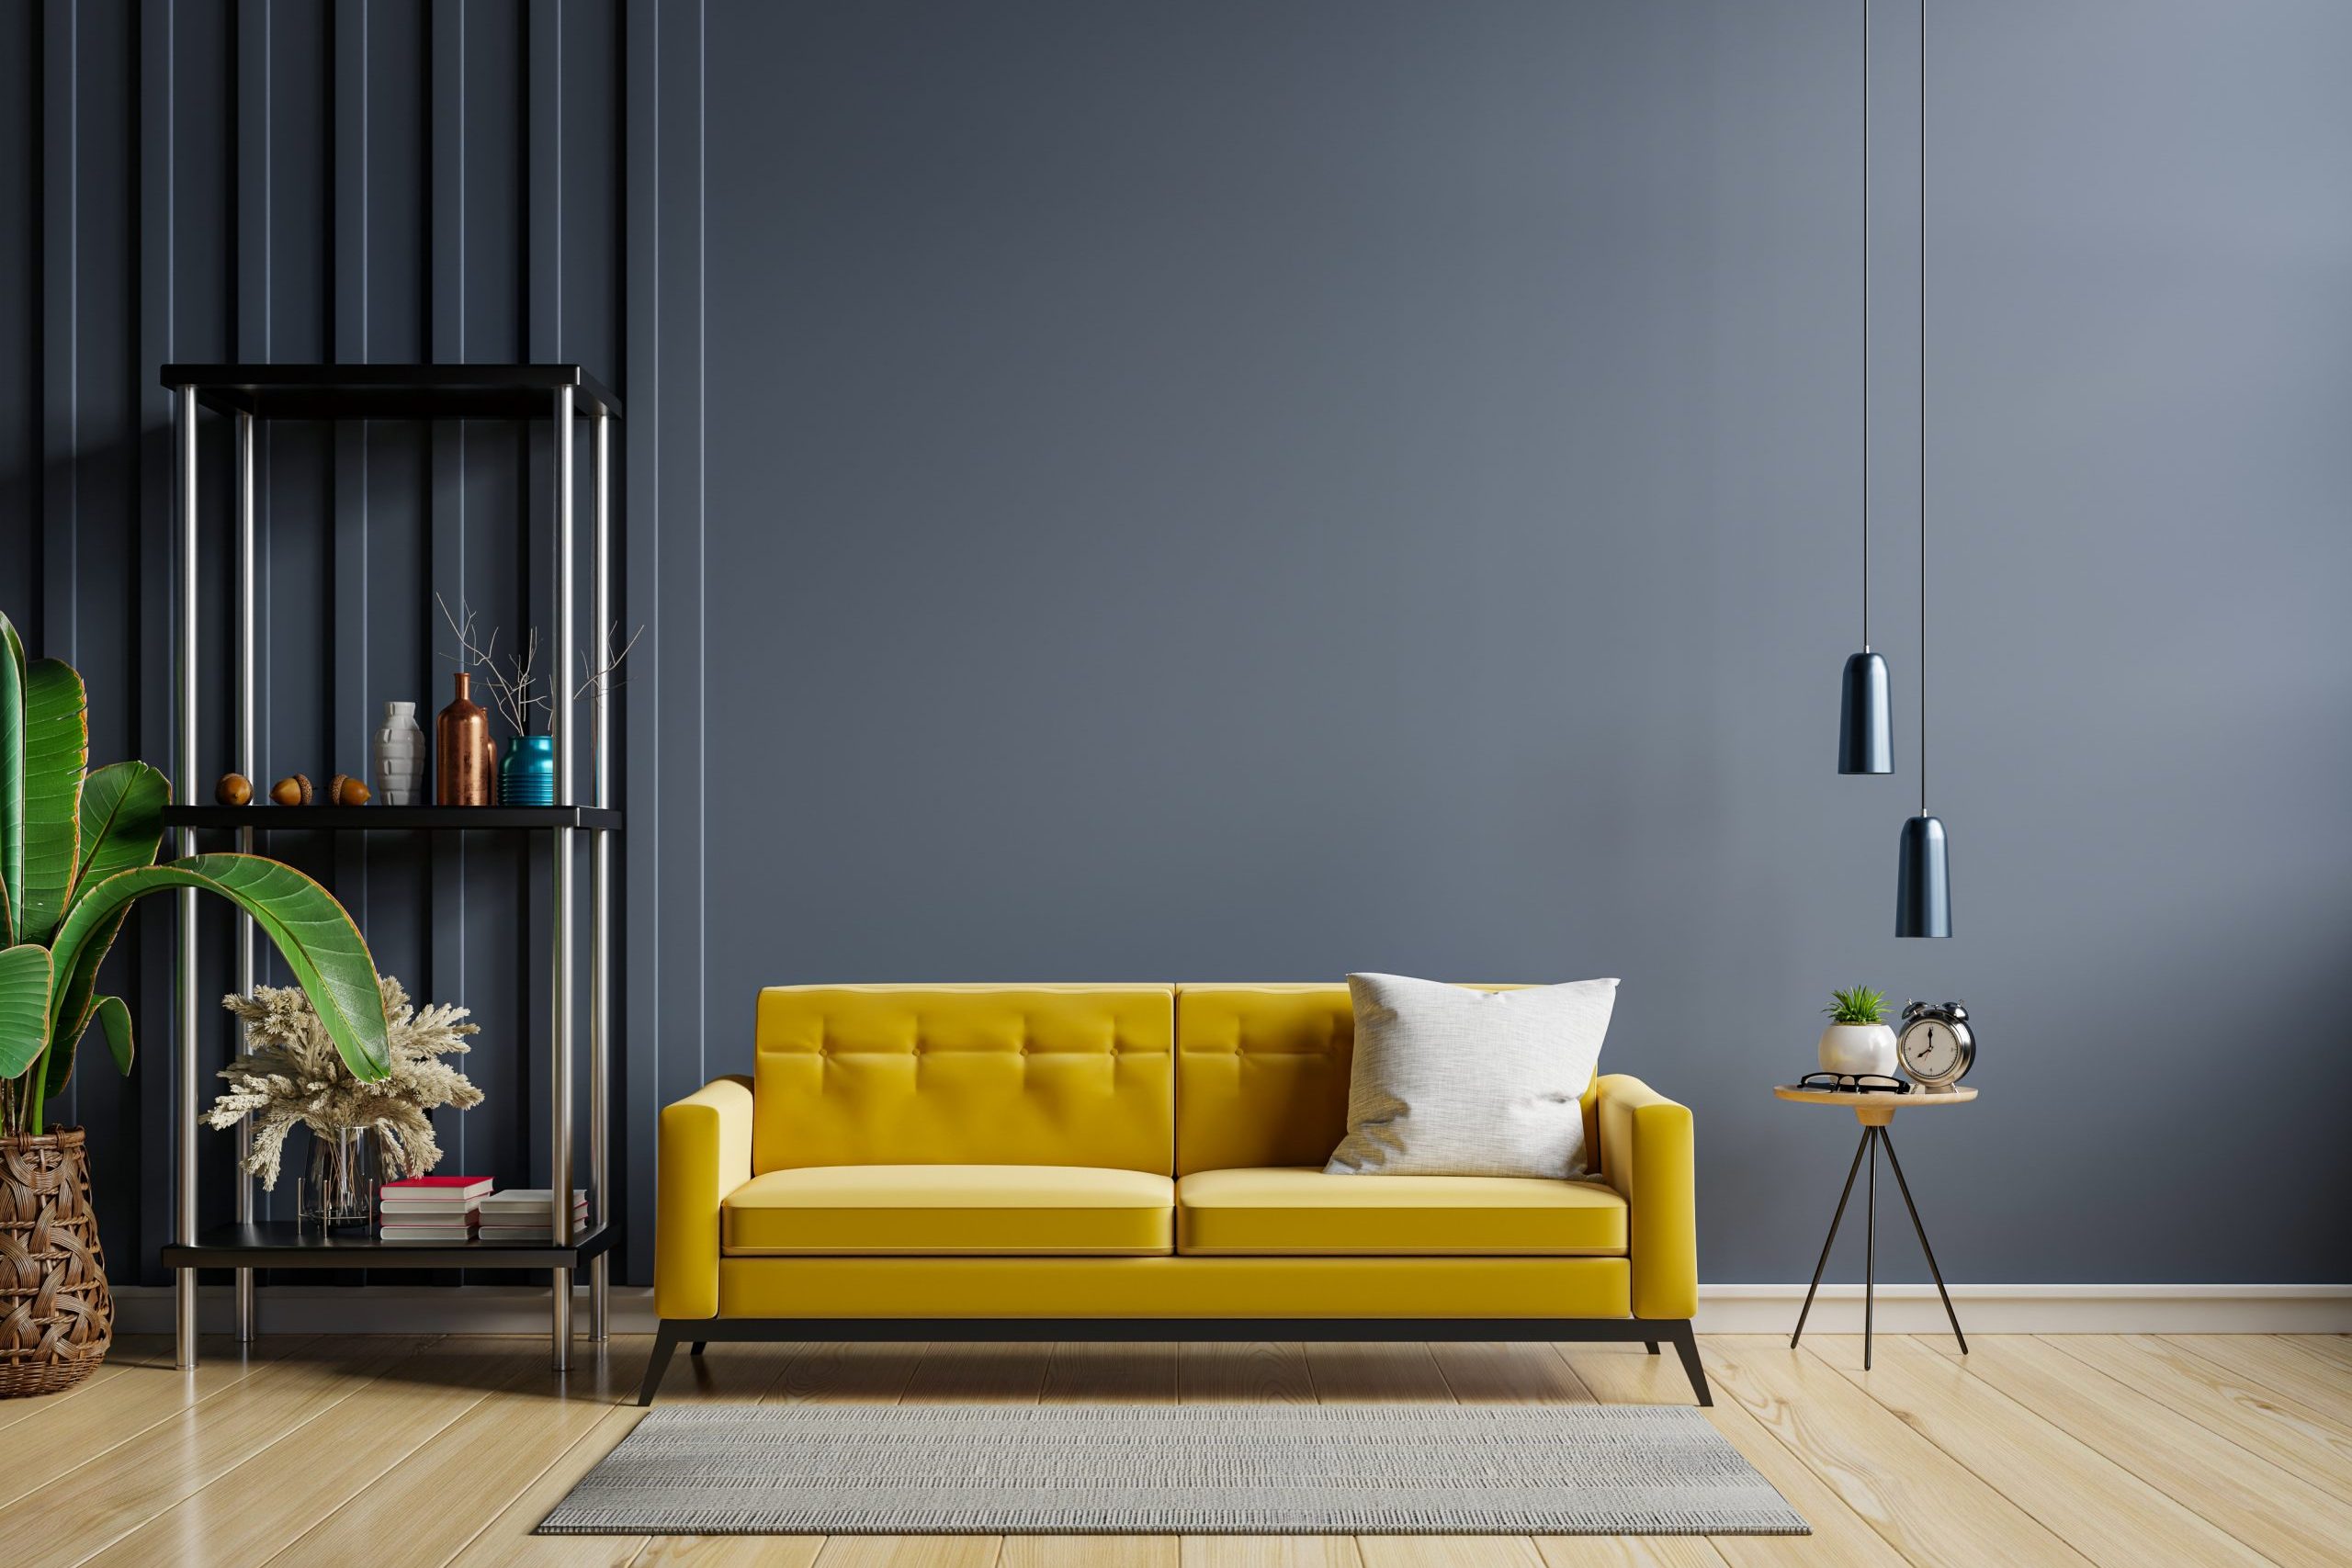 Yellow sofa and a wooden table in living room interior with plant,dark blue wall.3d rendering